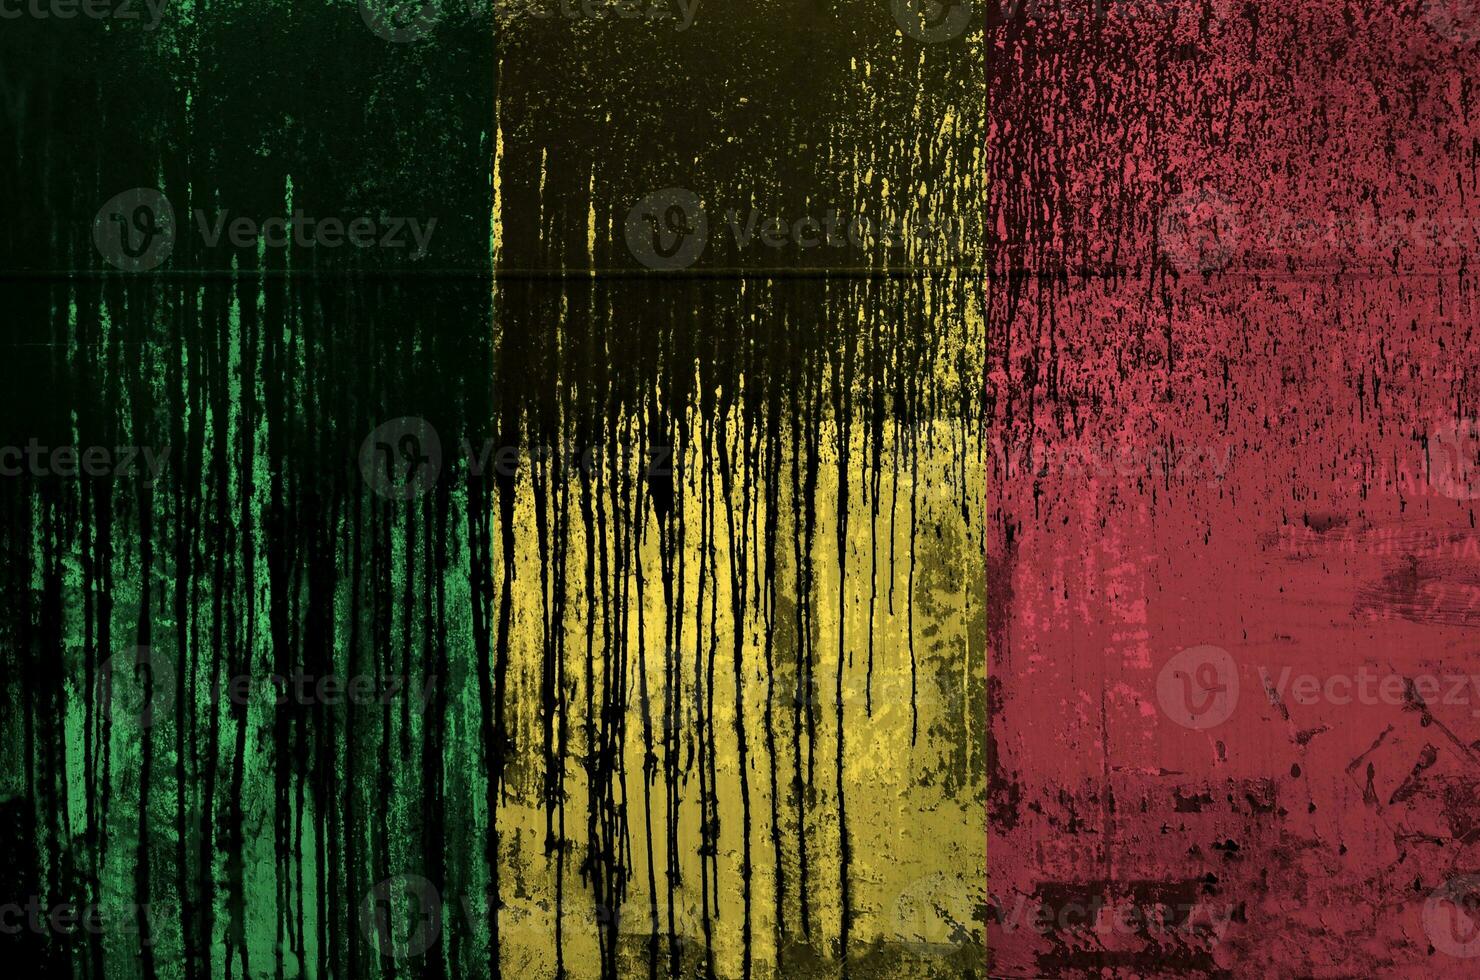 Mali flag depicted in paint colors on old and dirty oil barrel wall closeup. Textured banner on rough background photo